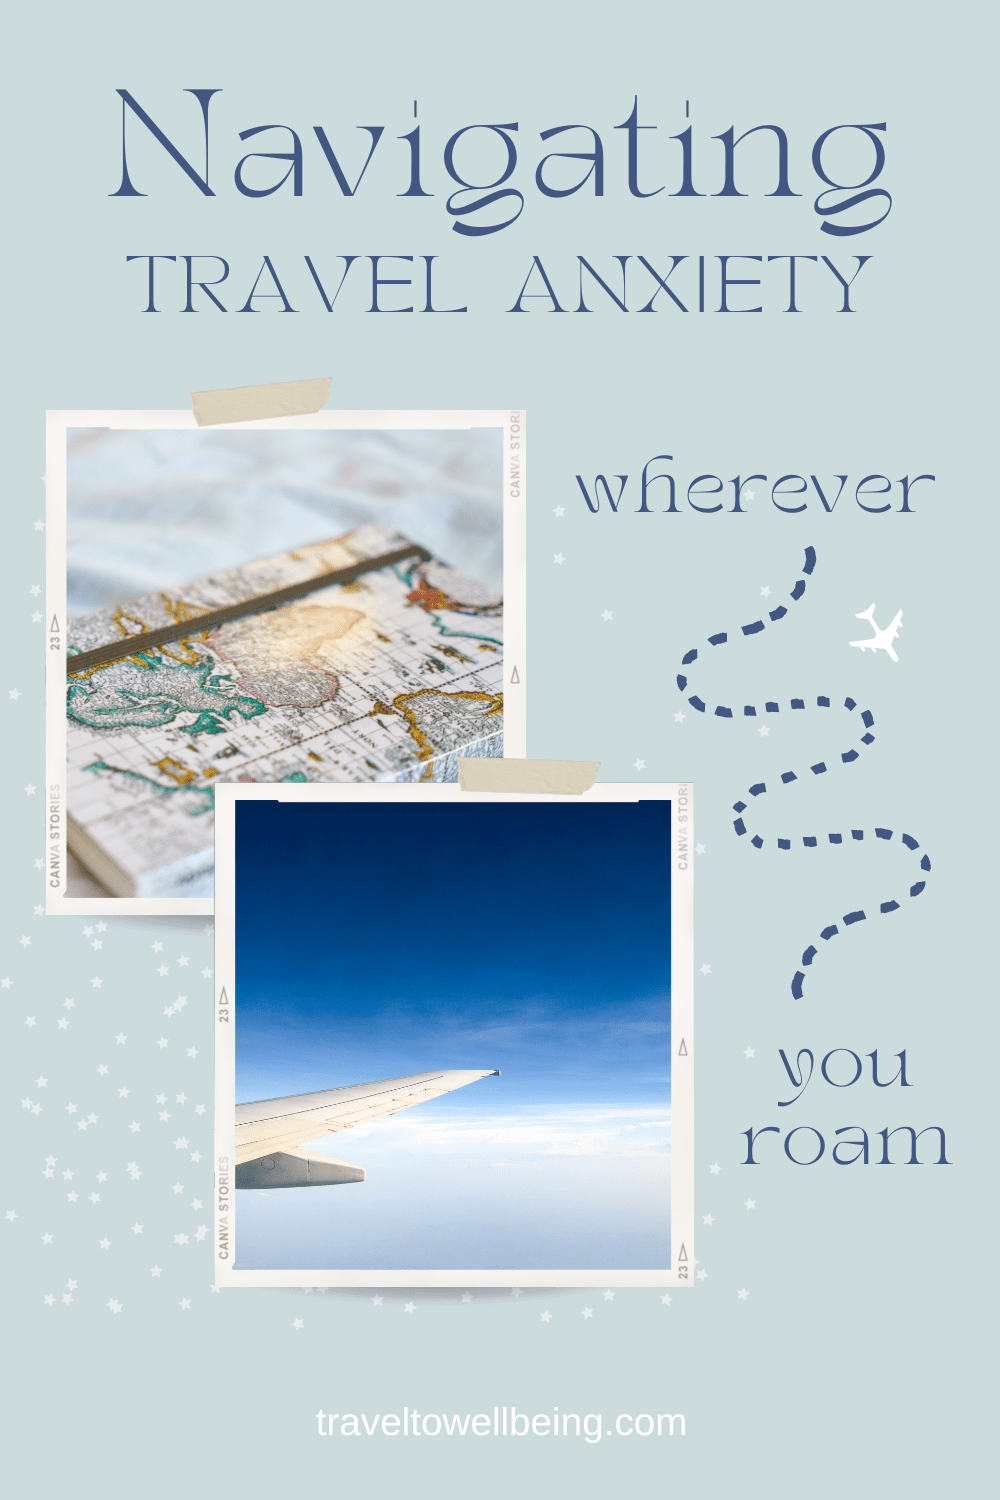 Navigating Travel Anxiety: A Guide to Finding Calm on The Road